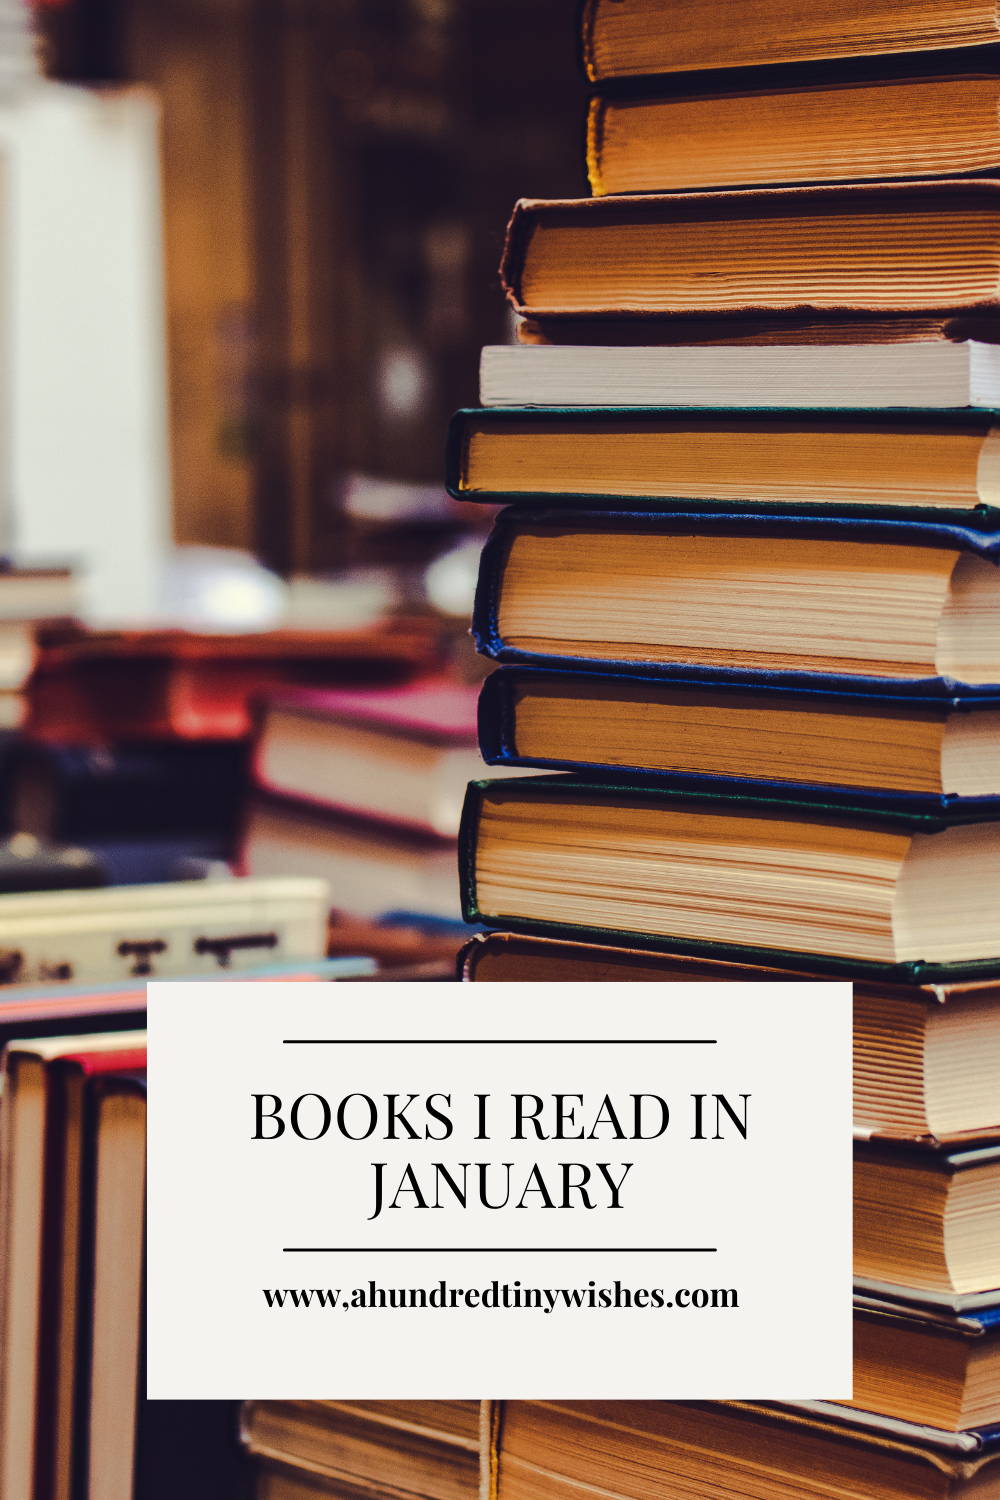 January Book Recommendations